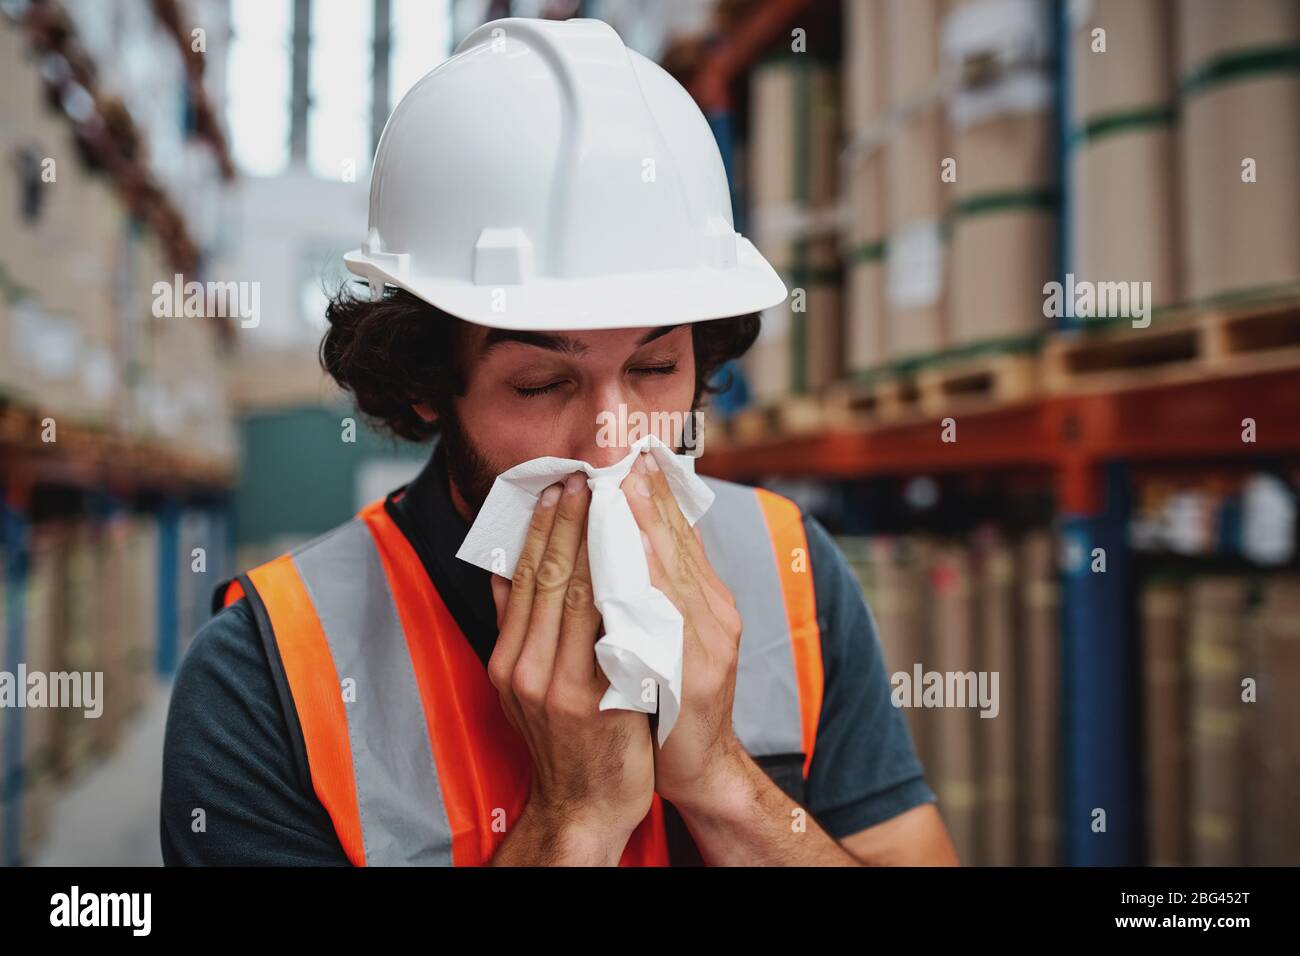 Young warehouse worker feeling sick while sneezing and coughing at factory standing near packed cardboard boxes on shelf Stock Photo